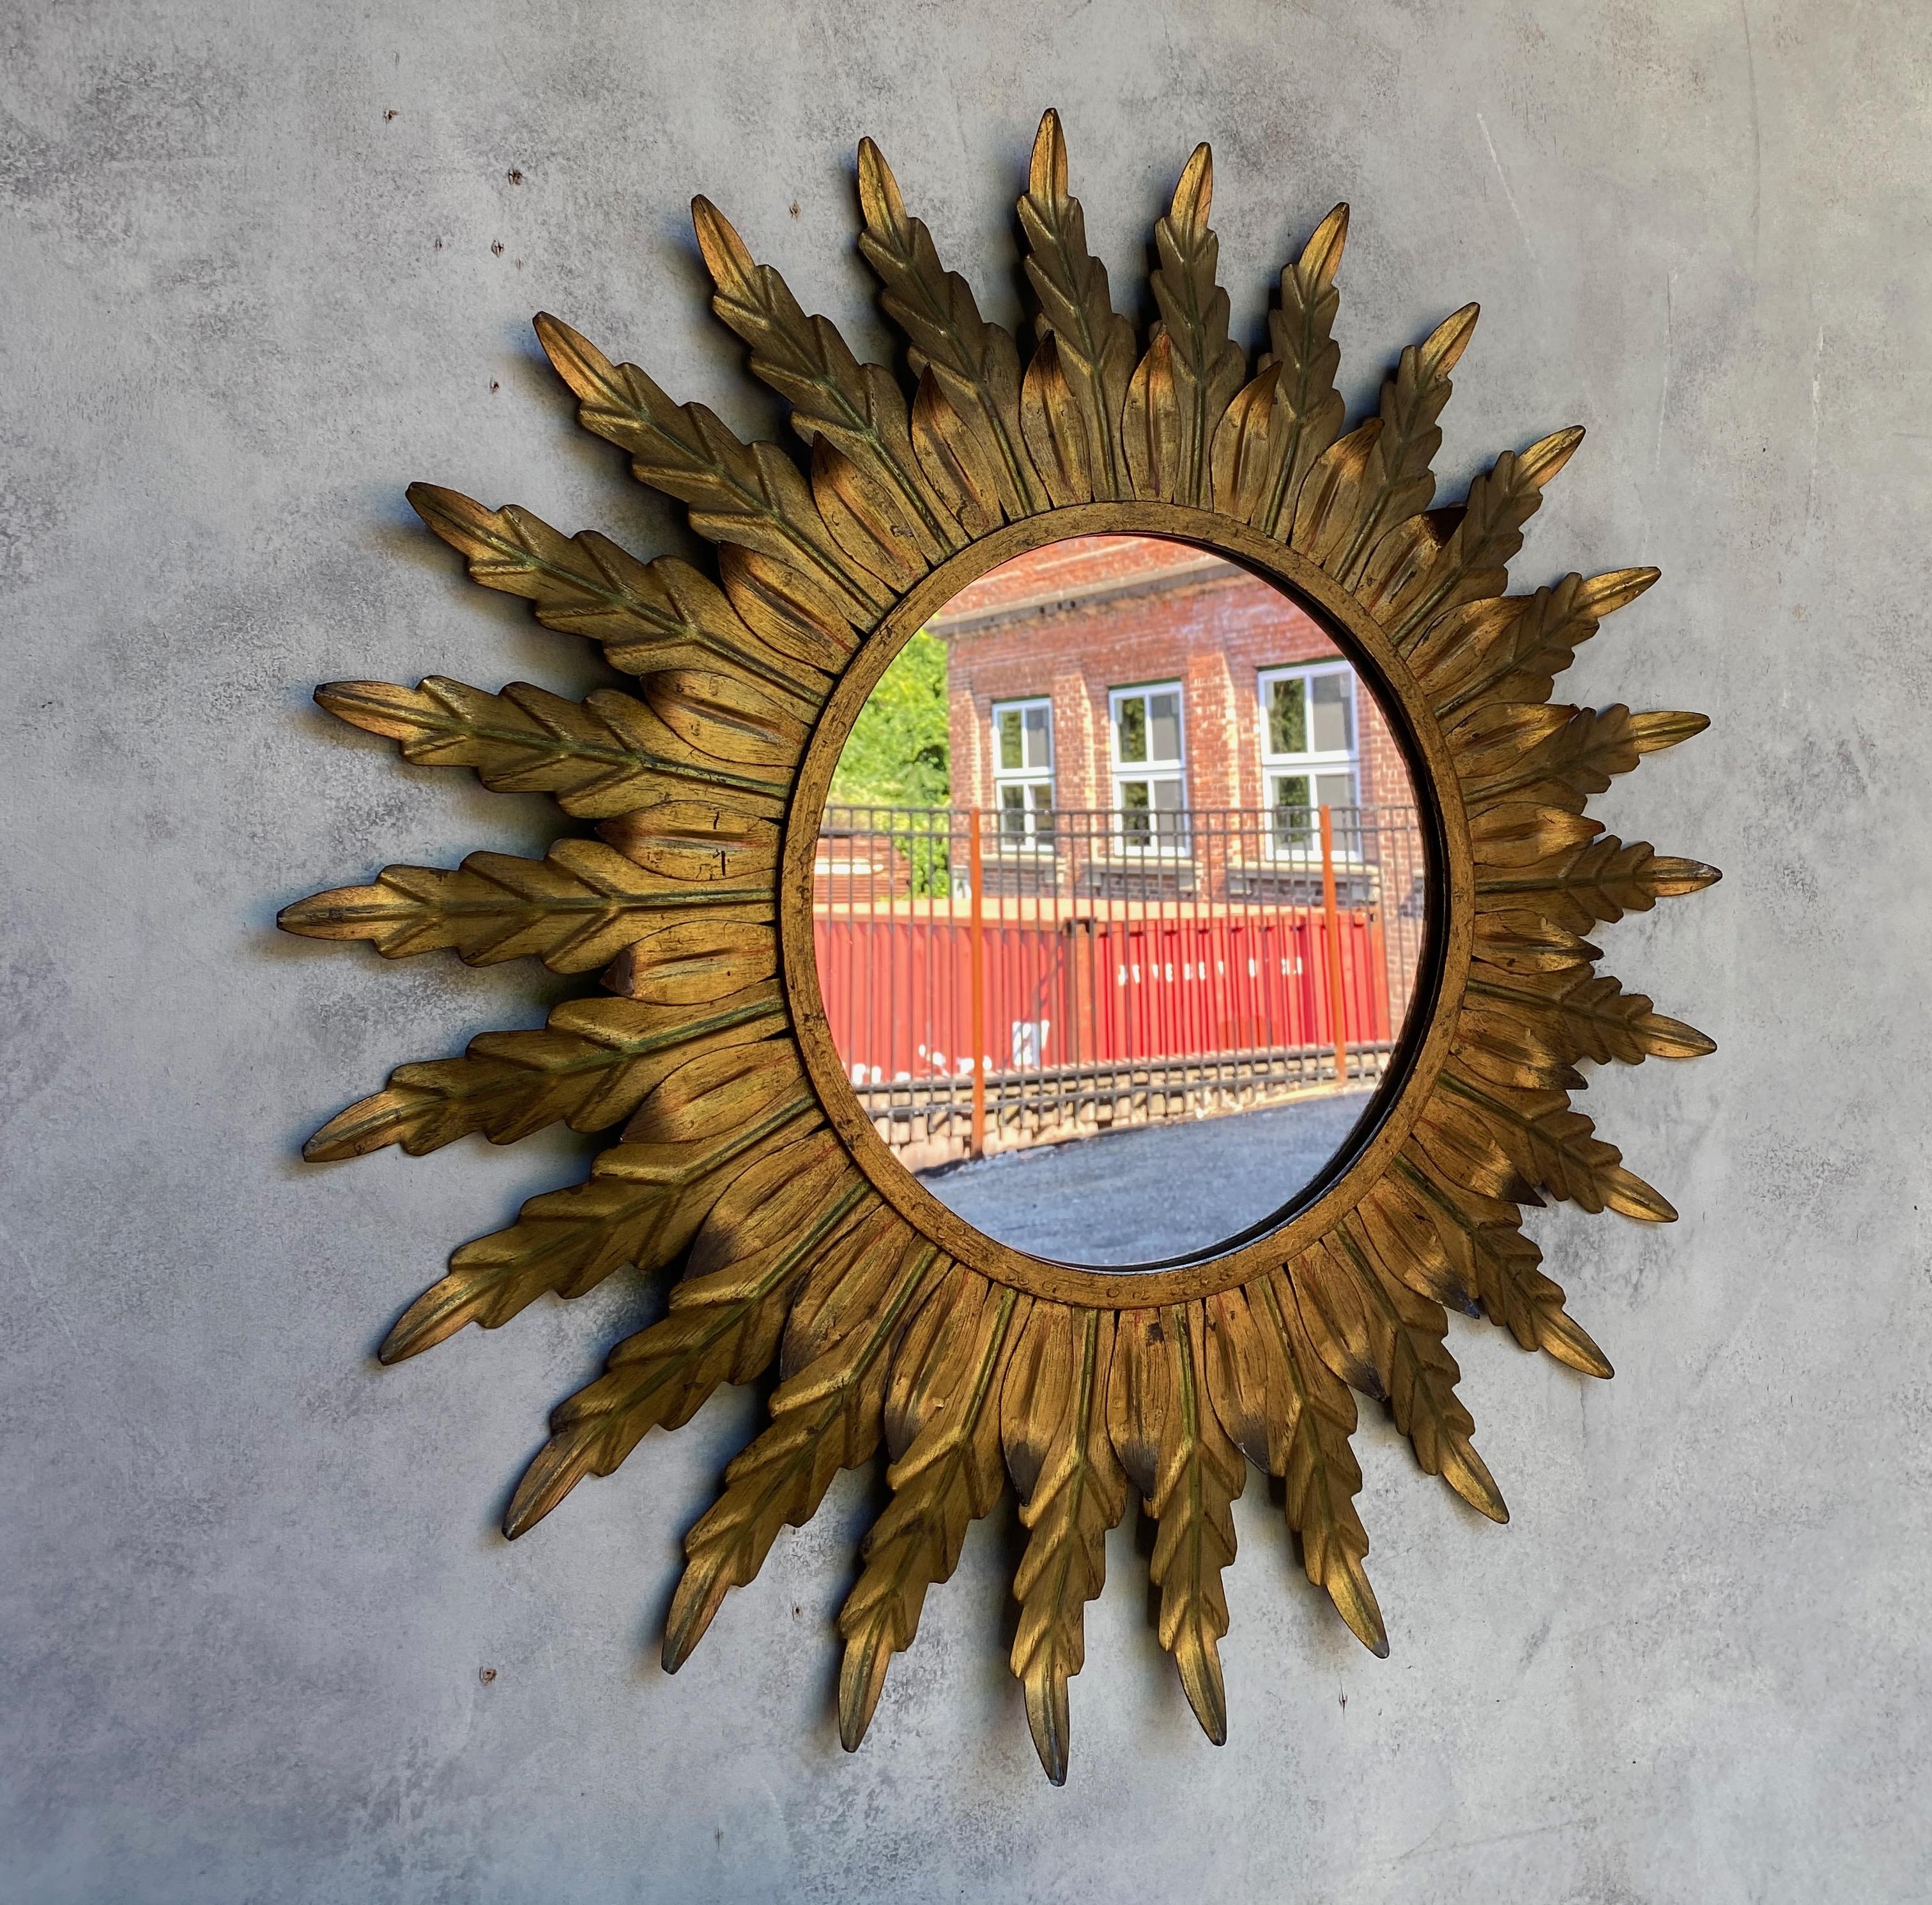 Mid-20th Century Gilt Metal Sunburst Mirror with Radiating Leaves and Traces of Green Hues